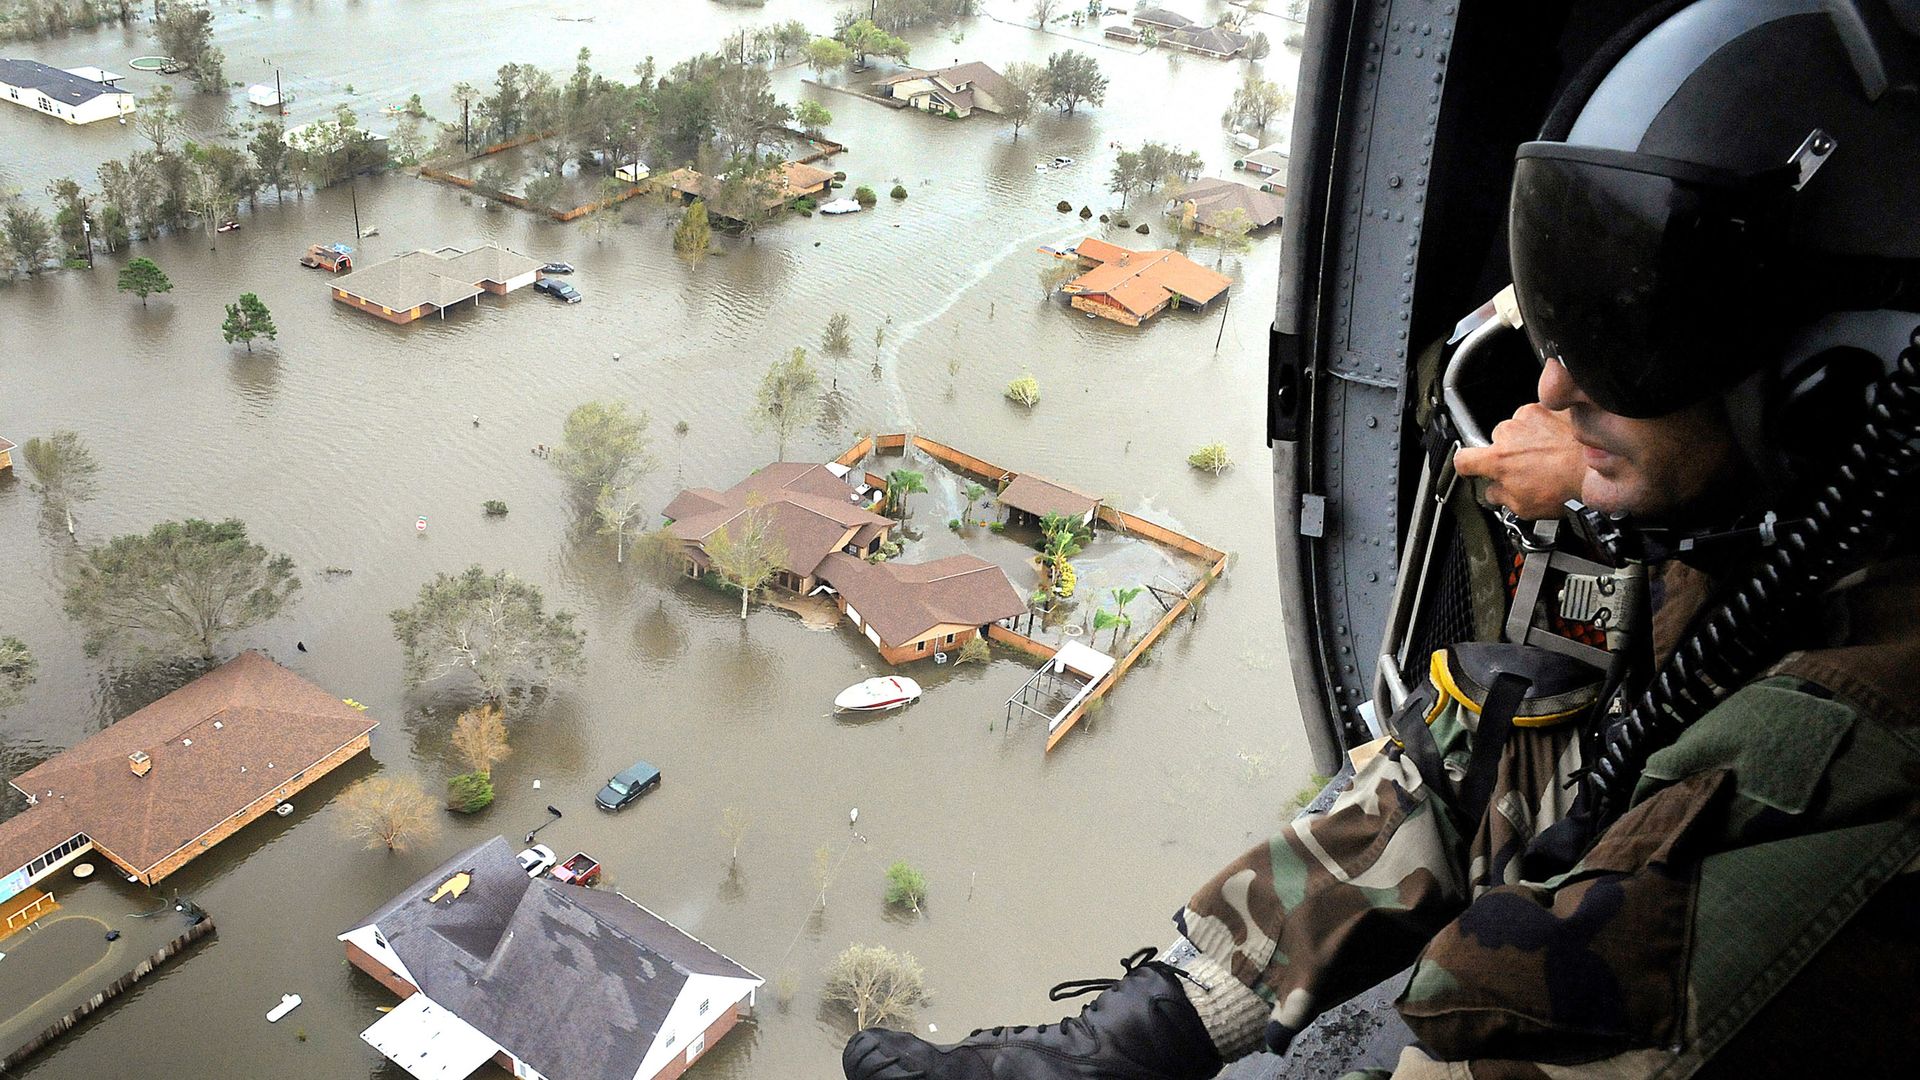 An Air Force Reserve pararescueman from the 920th Rescue Wing scans the landscape of Nederland, Texas in the aftermath of Hurricane Ike, 13 September 2008